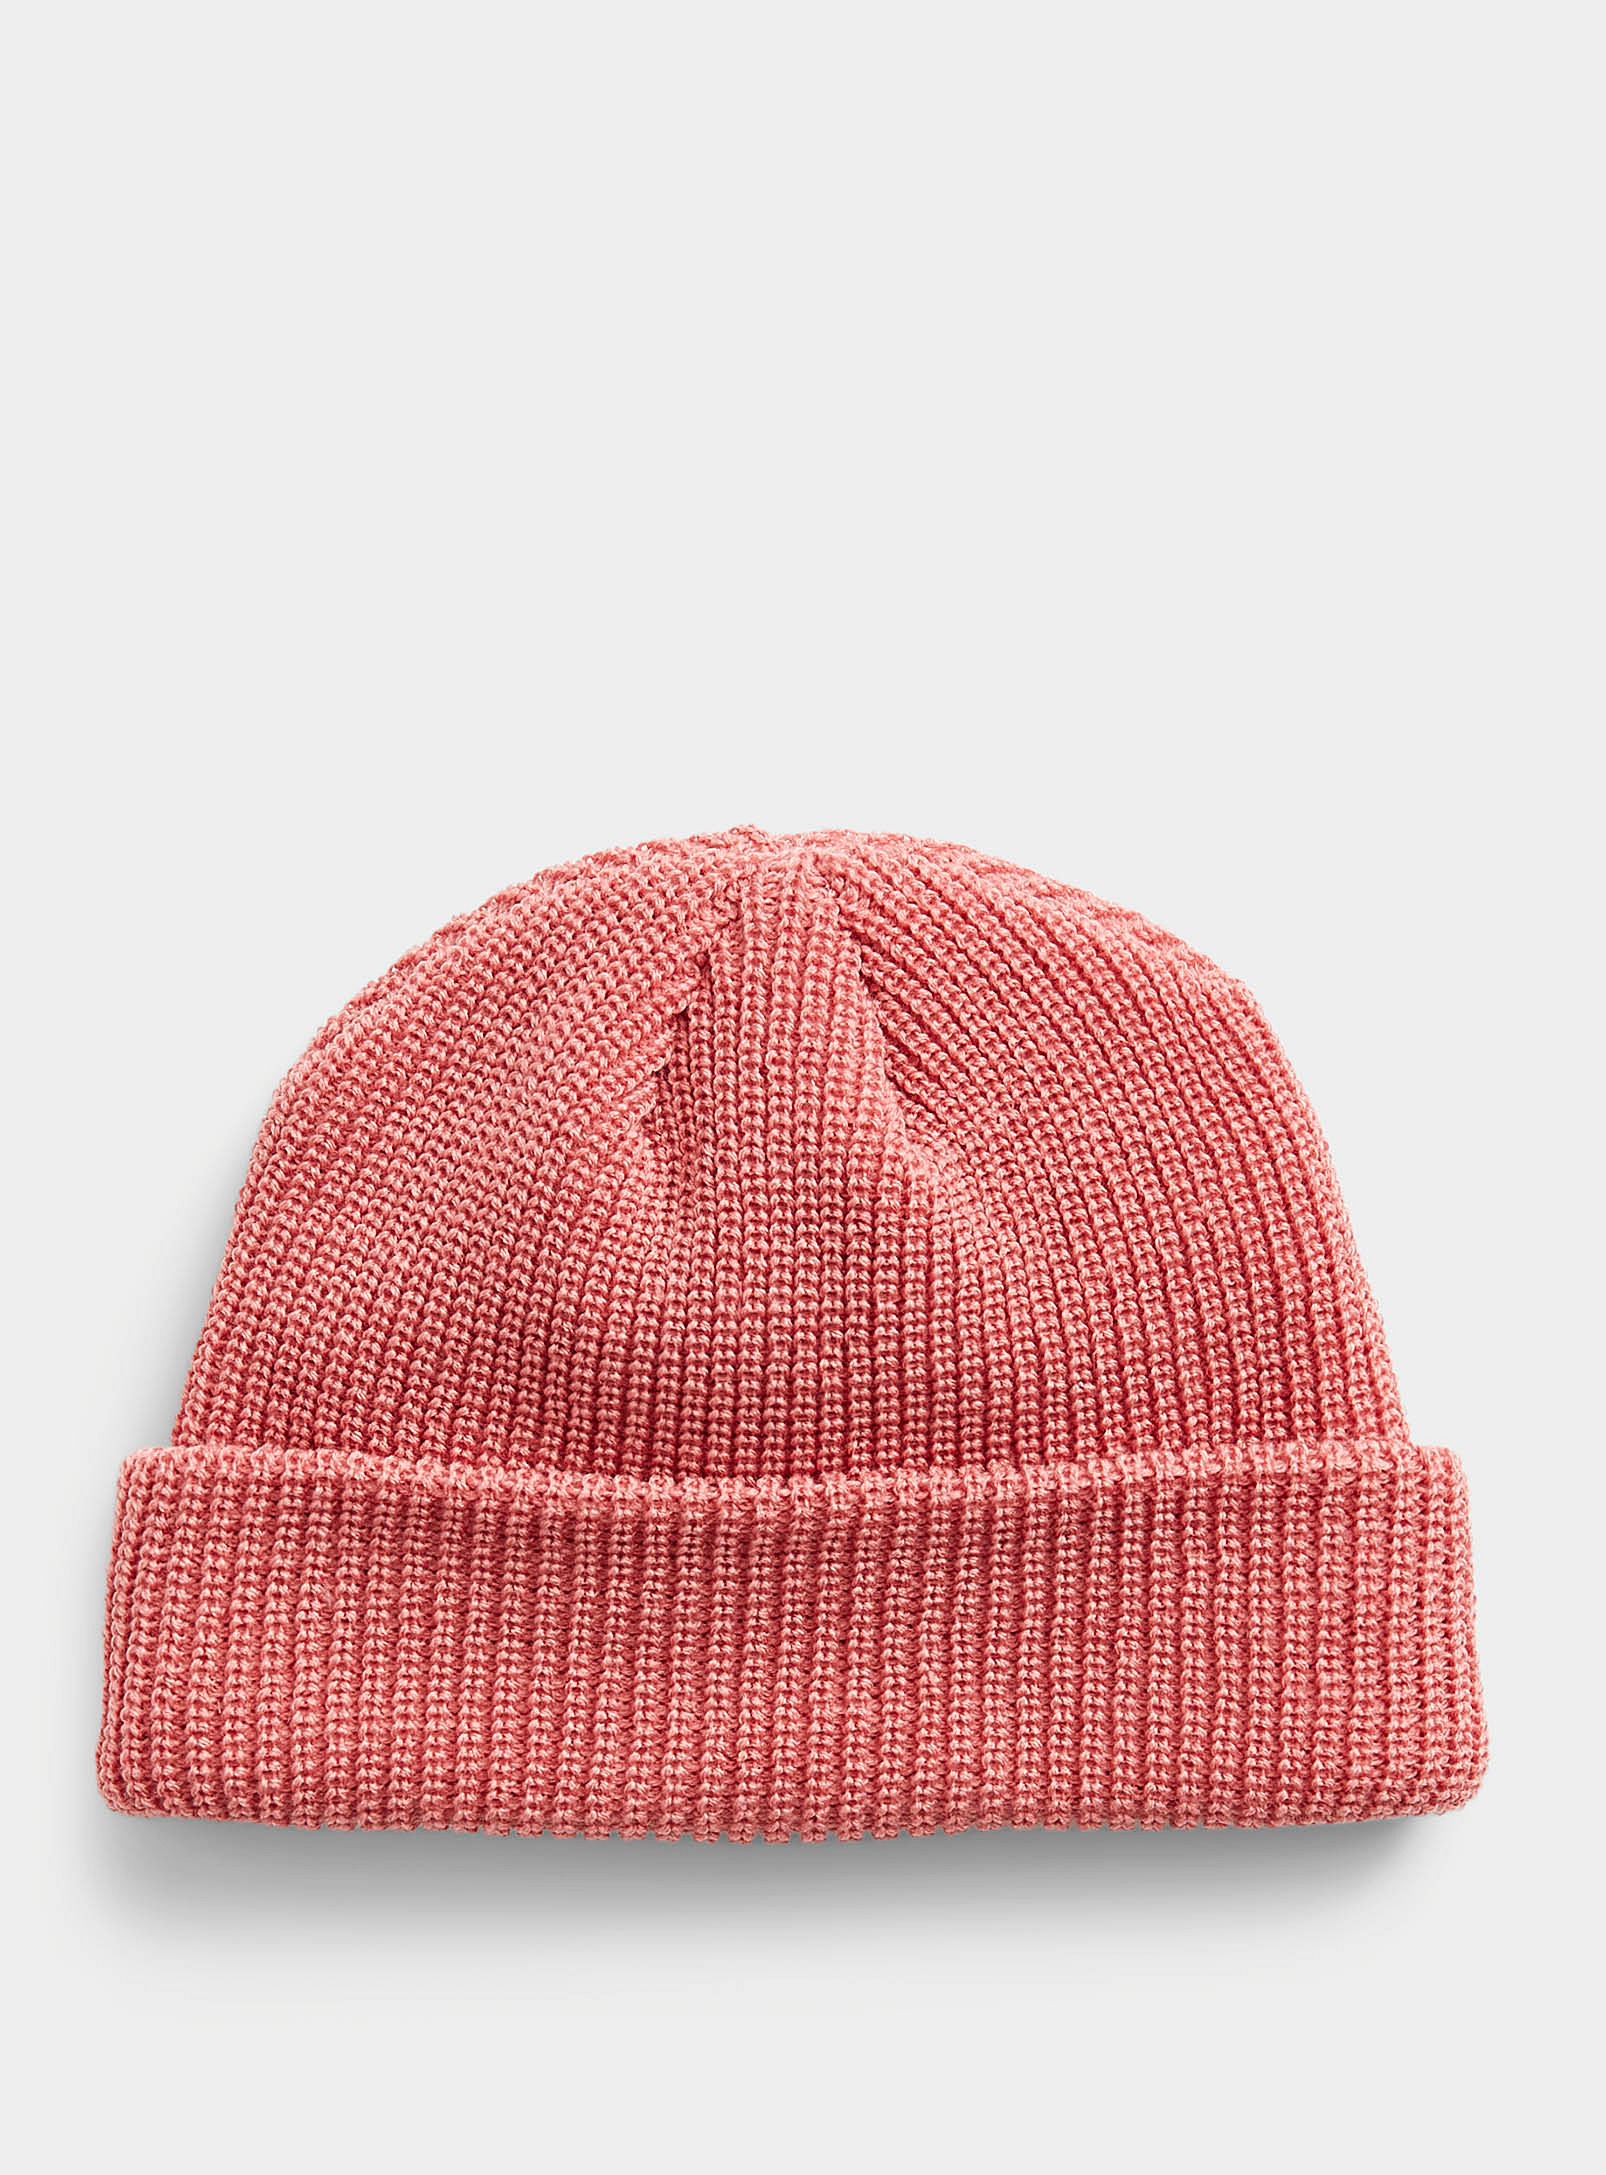 Djab Cuffed Docker Tuque Made In Canada In Pink